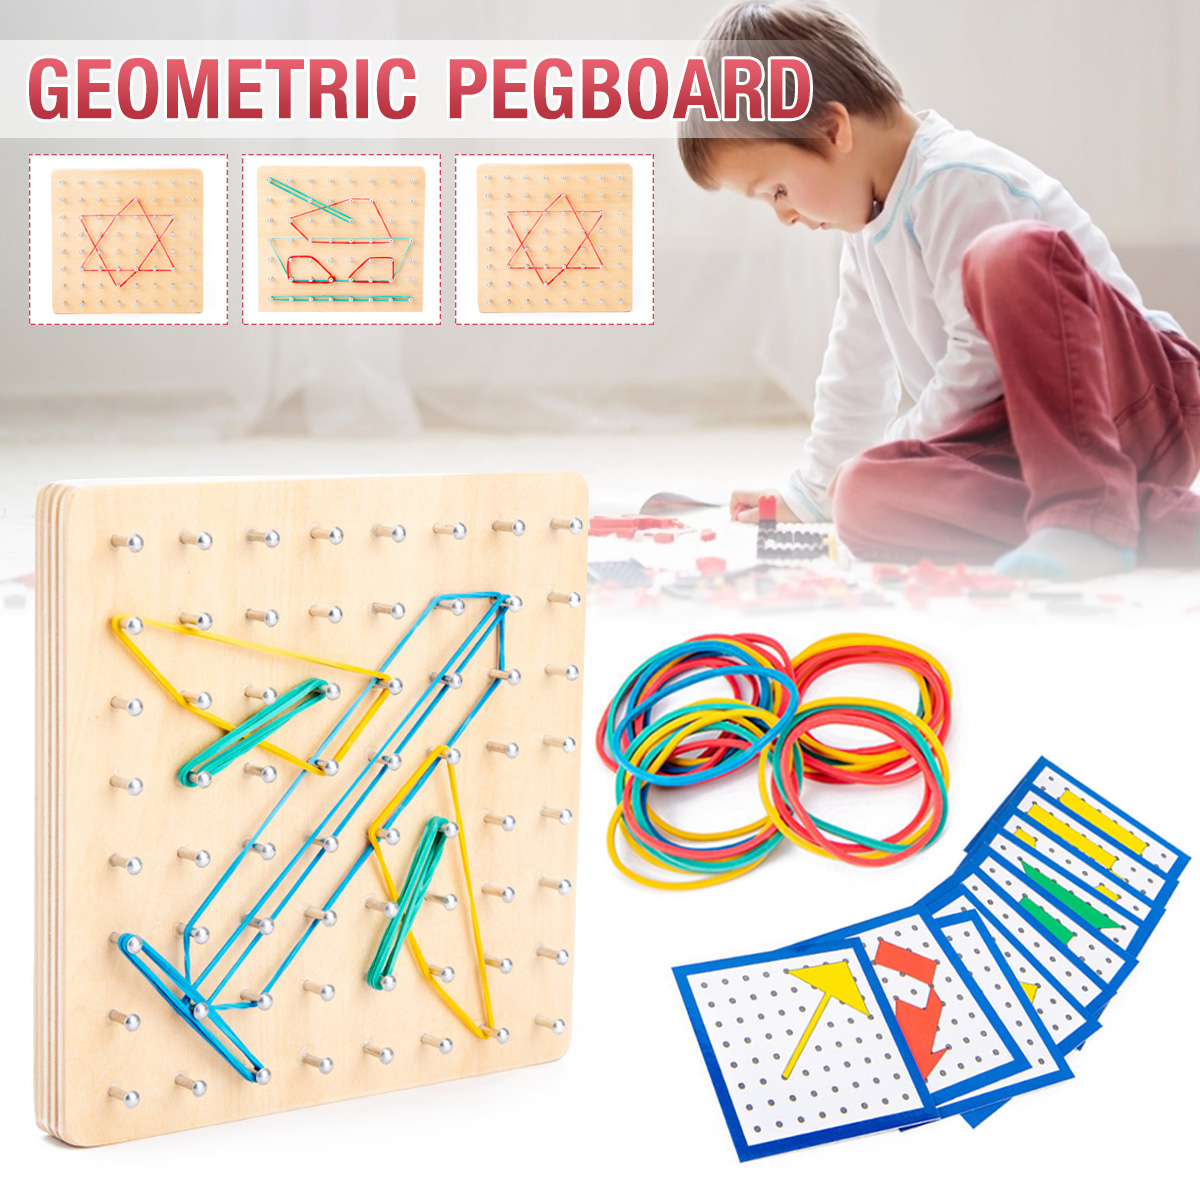 Montessori-Traditional-Teaching-Geometry-Puzzle-Pattern-Educational-School-Home-Game-Toy-for-Kids-Gi-1726969-1